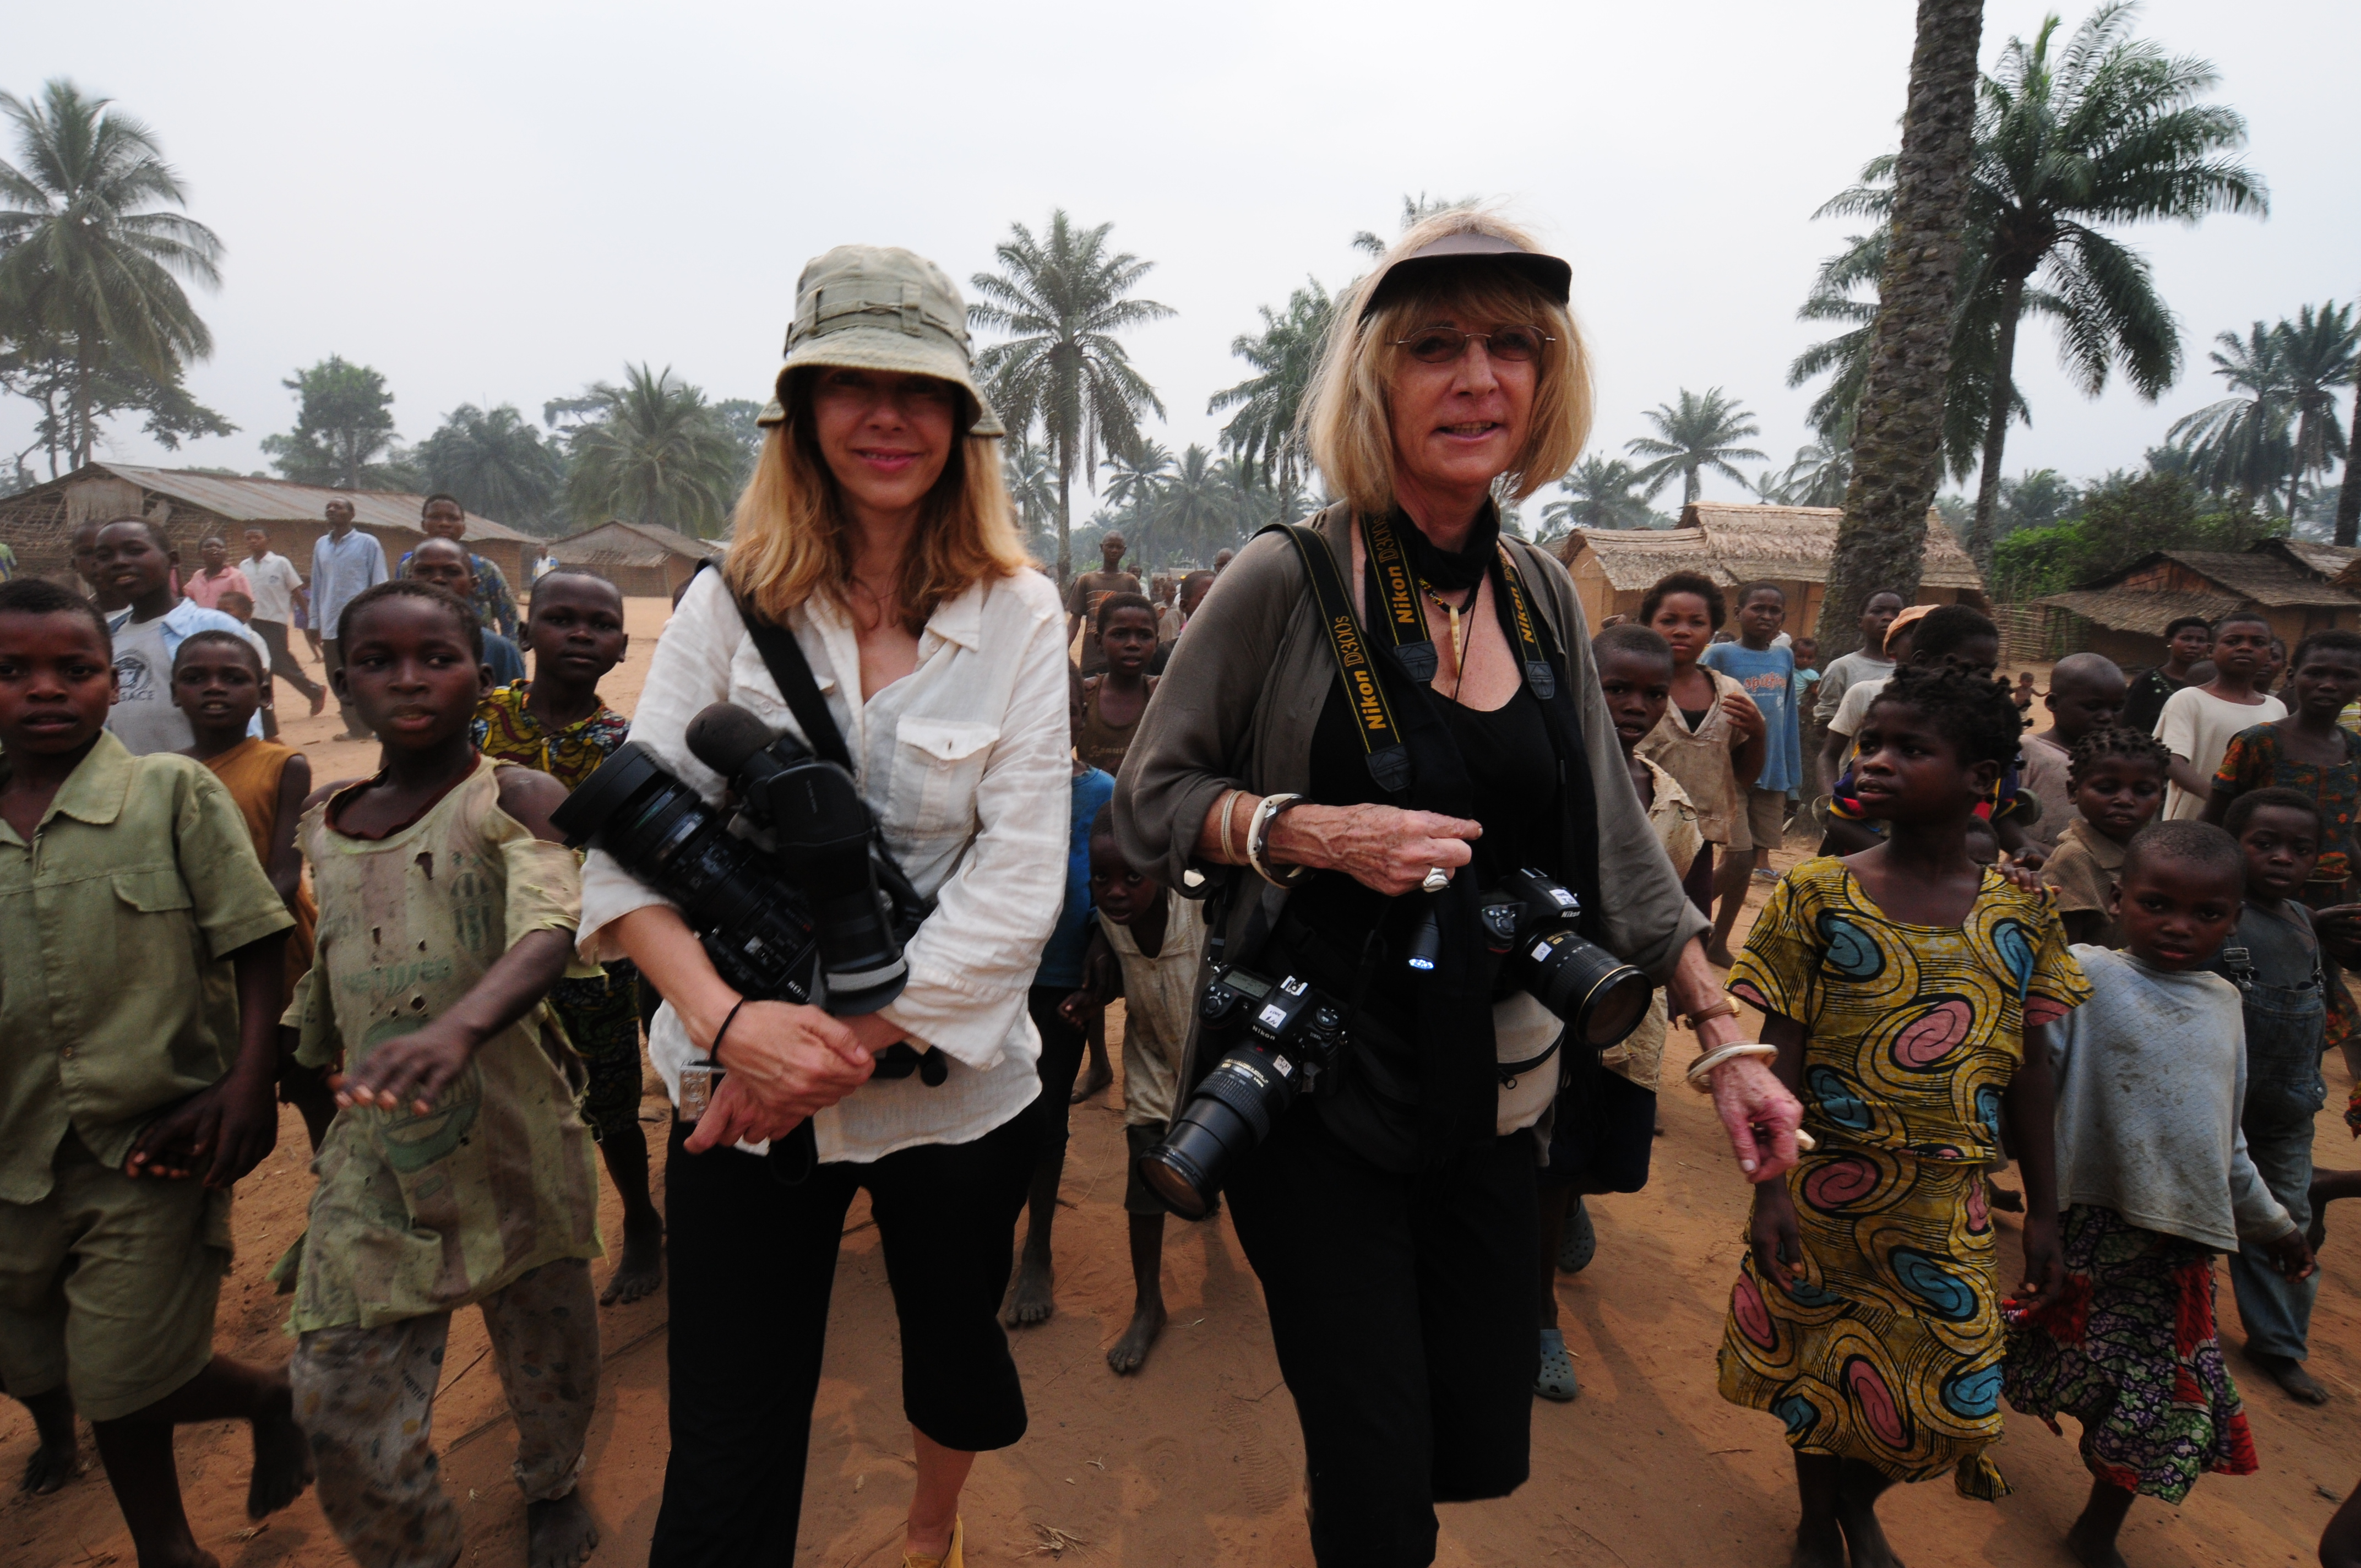 Documenting traditional ceremonies in the heart of DR Congo with Angela Fisher and Carol Beckwith